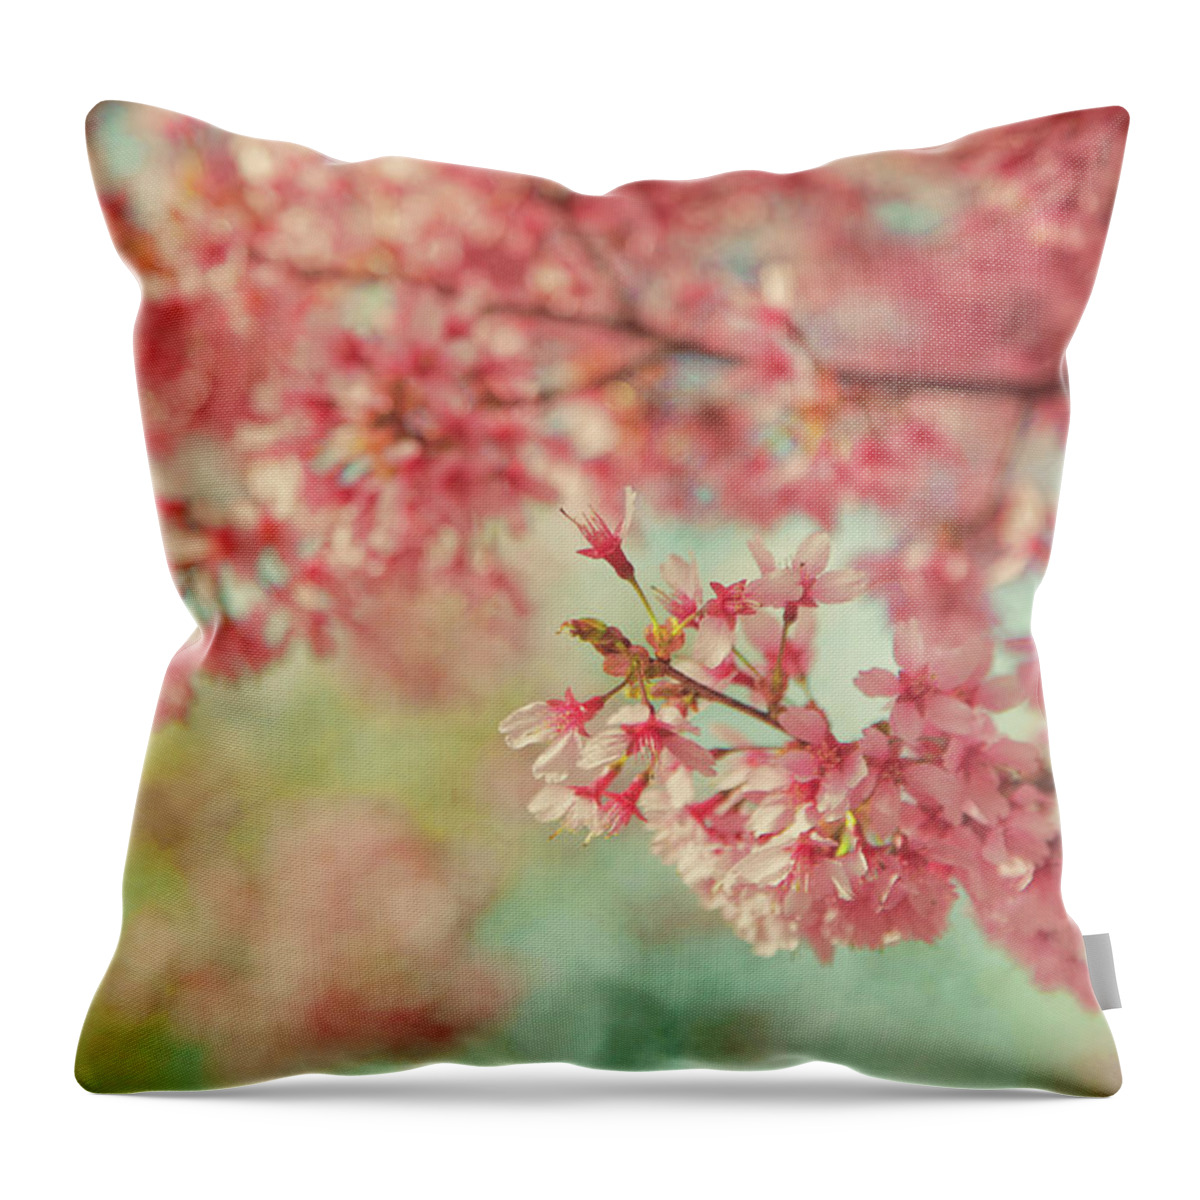 Pastel Throw Pillow featuring the photograph Beautiful Blossoms by Carrie Ann Grippo-Pike